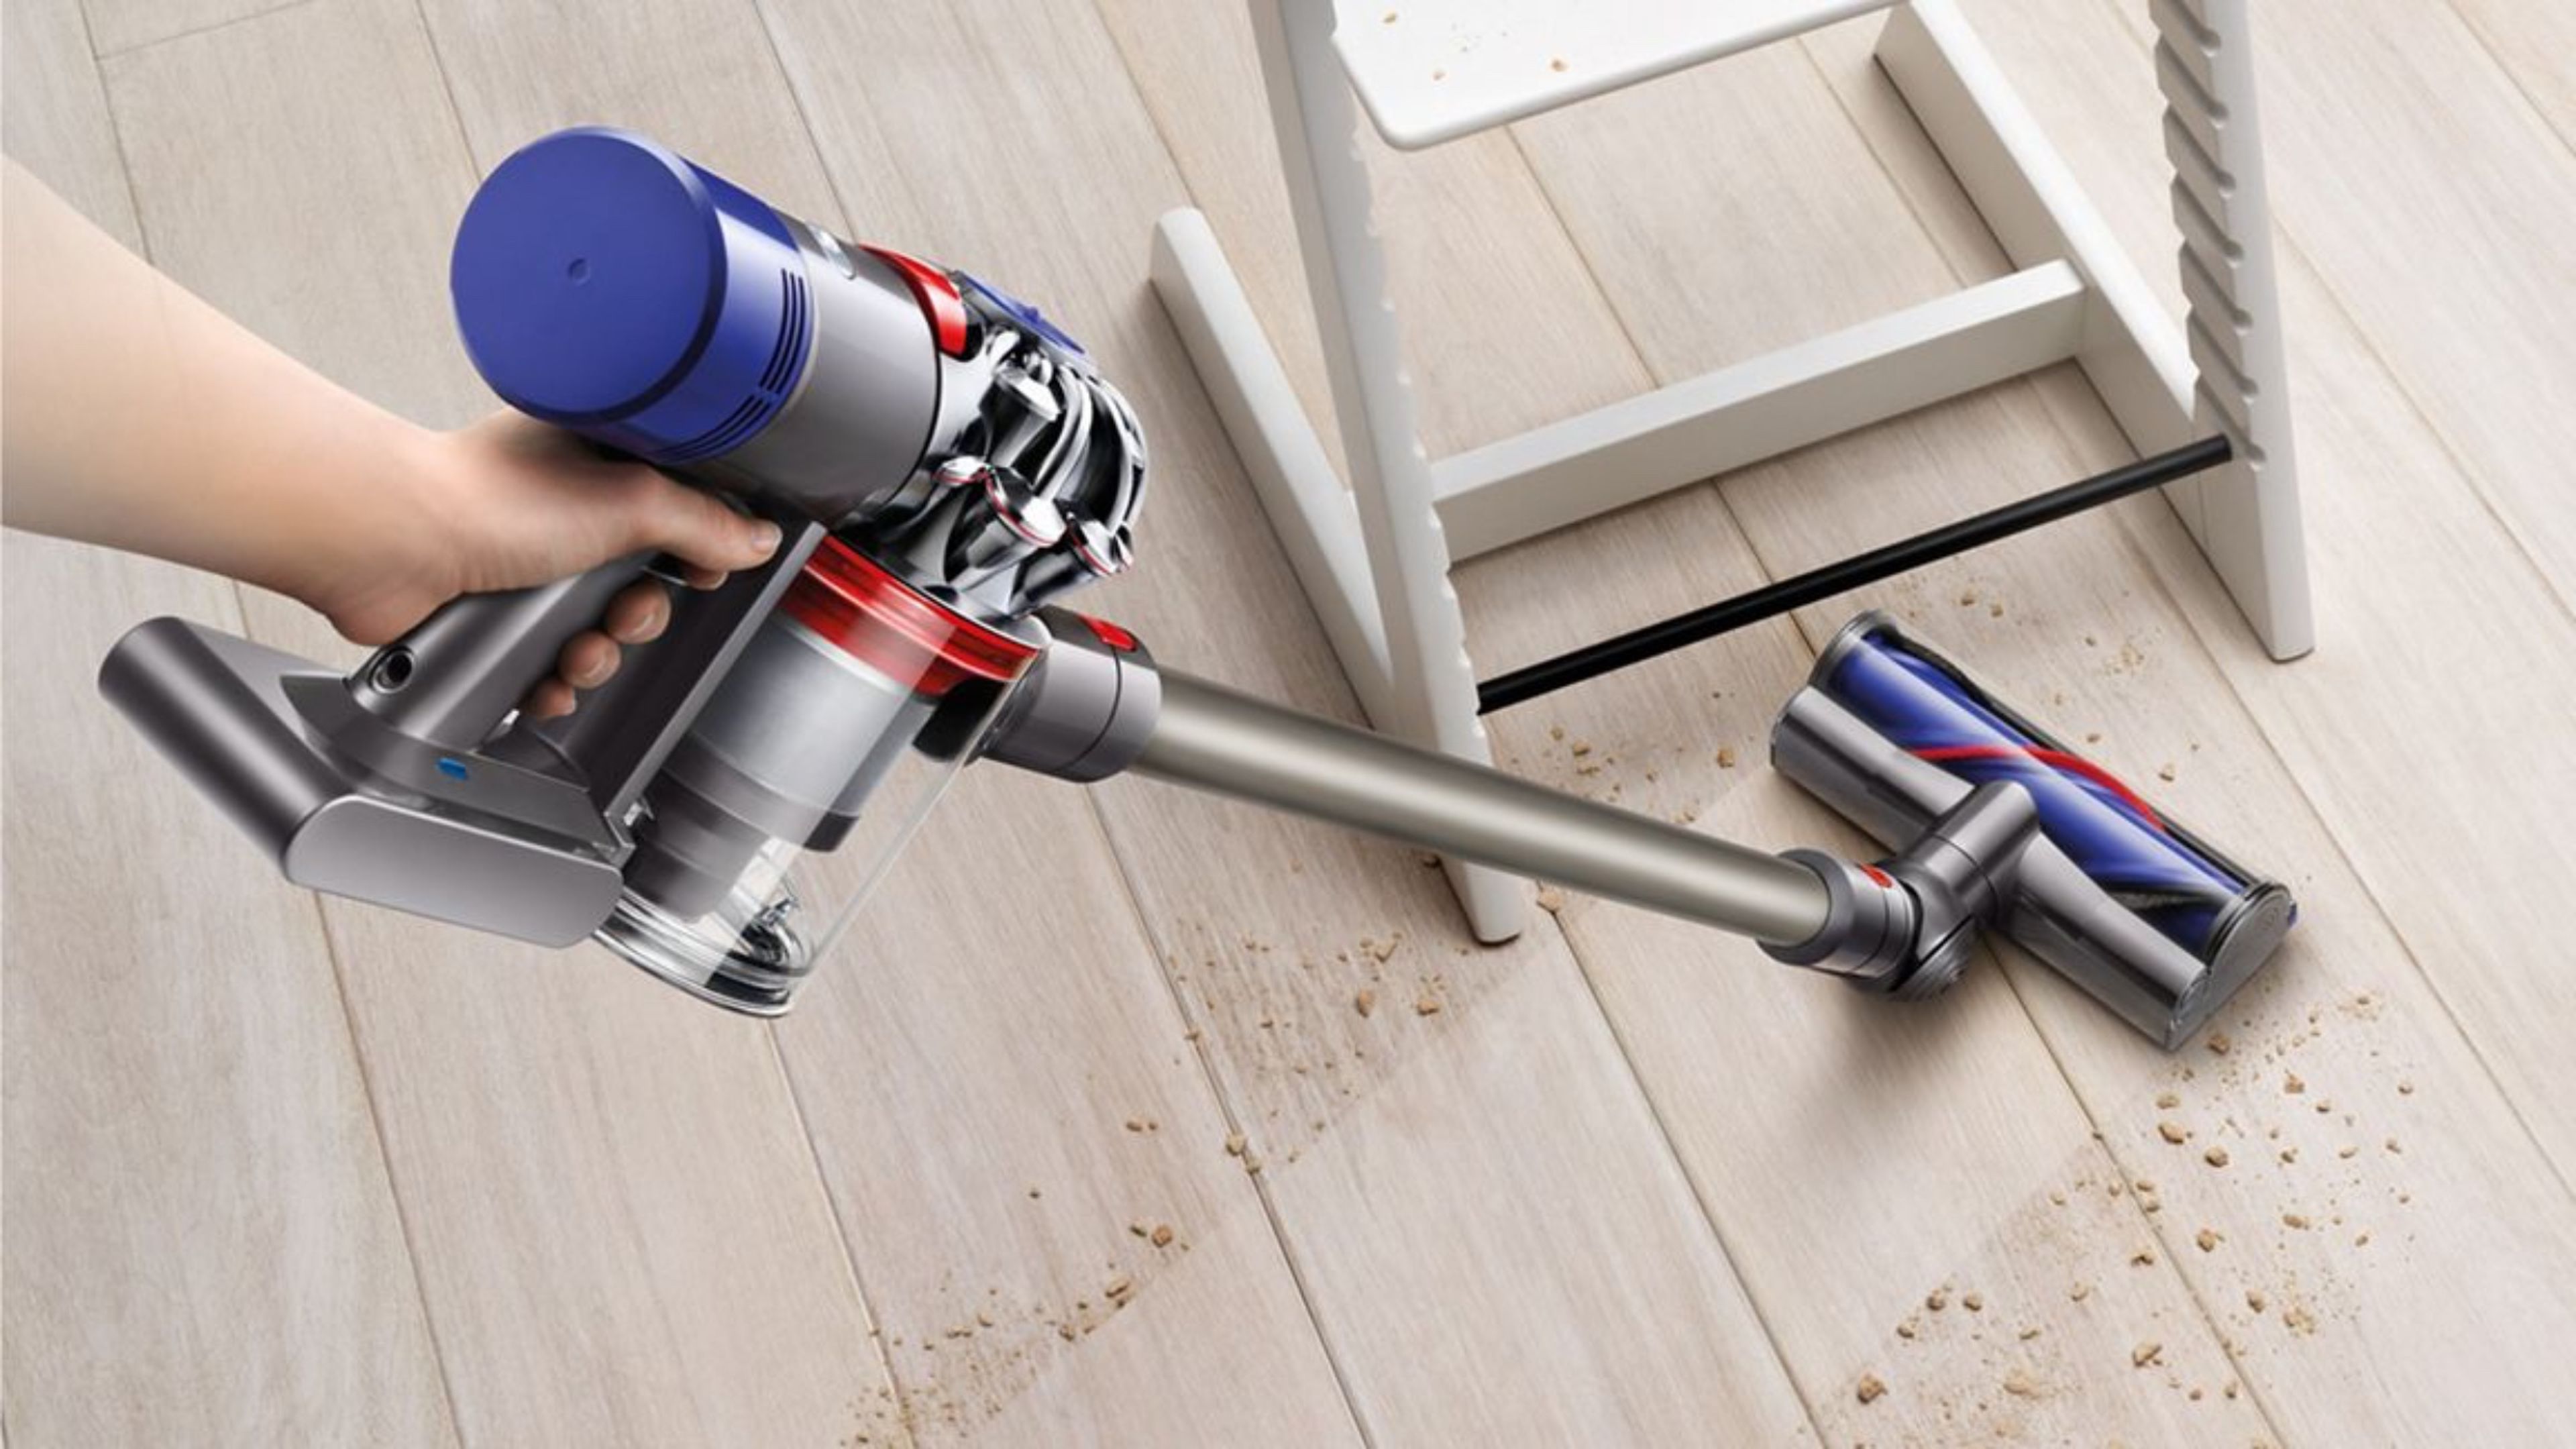 Dyson has reduced some of its most advanced premium vacuum cleaners to €100 Gearrice